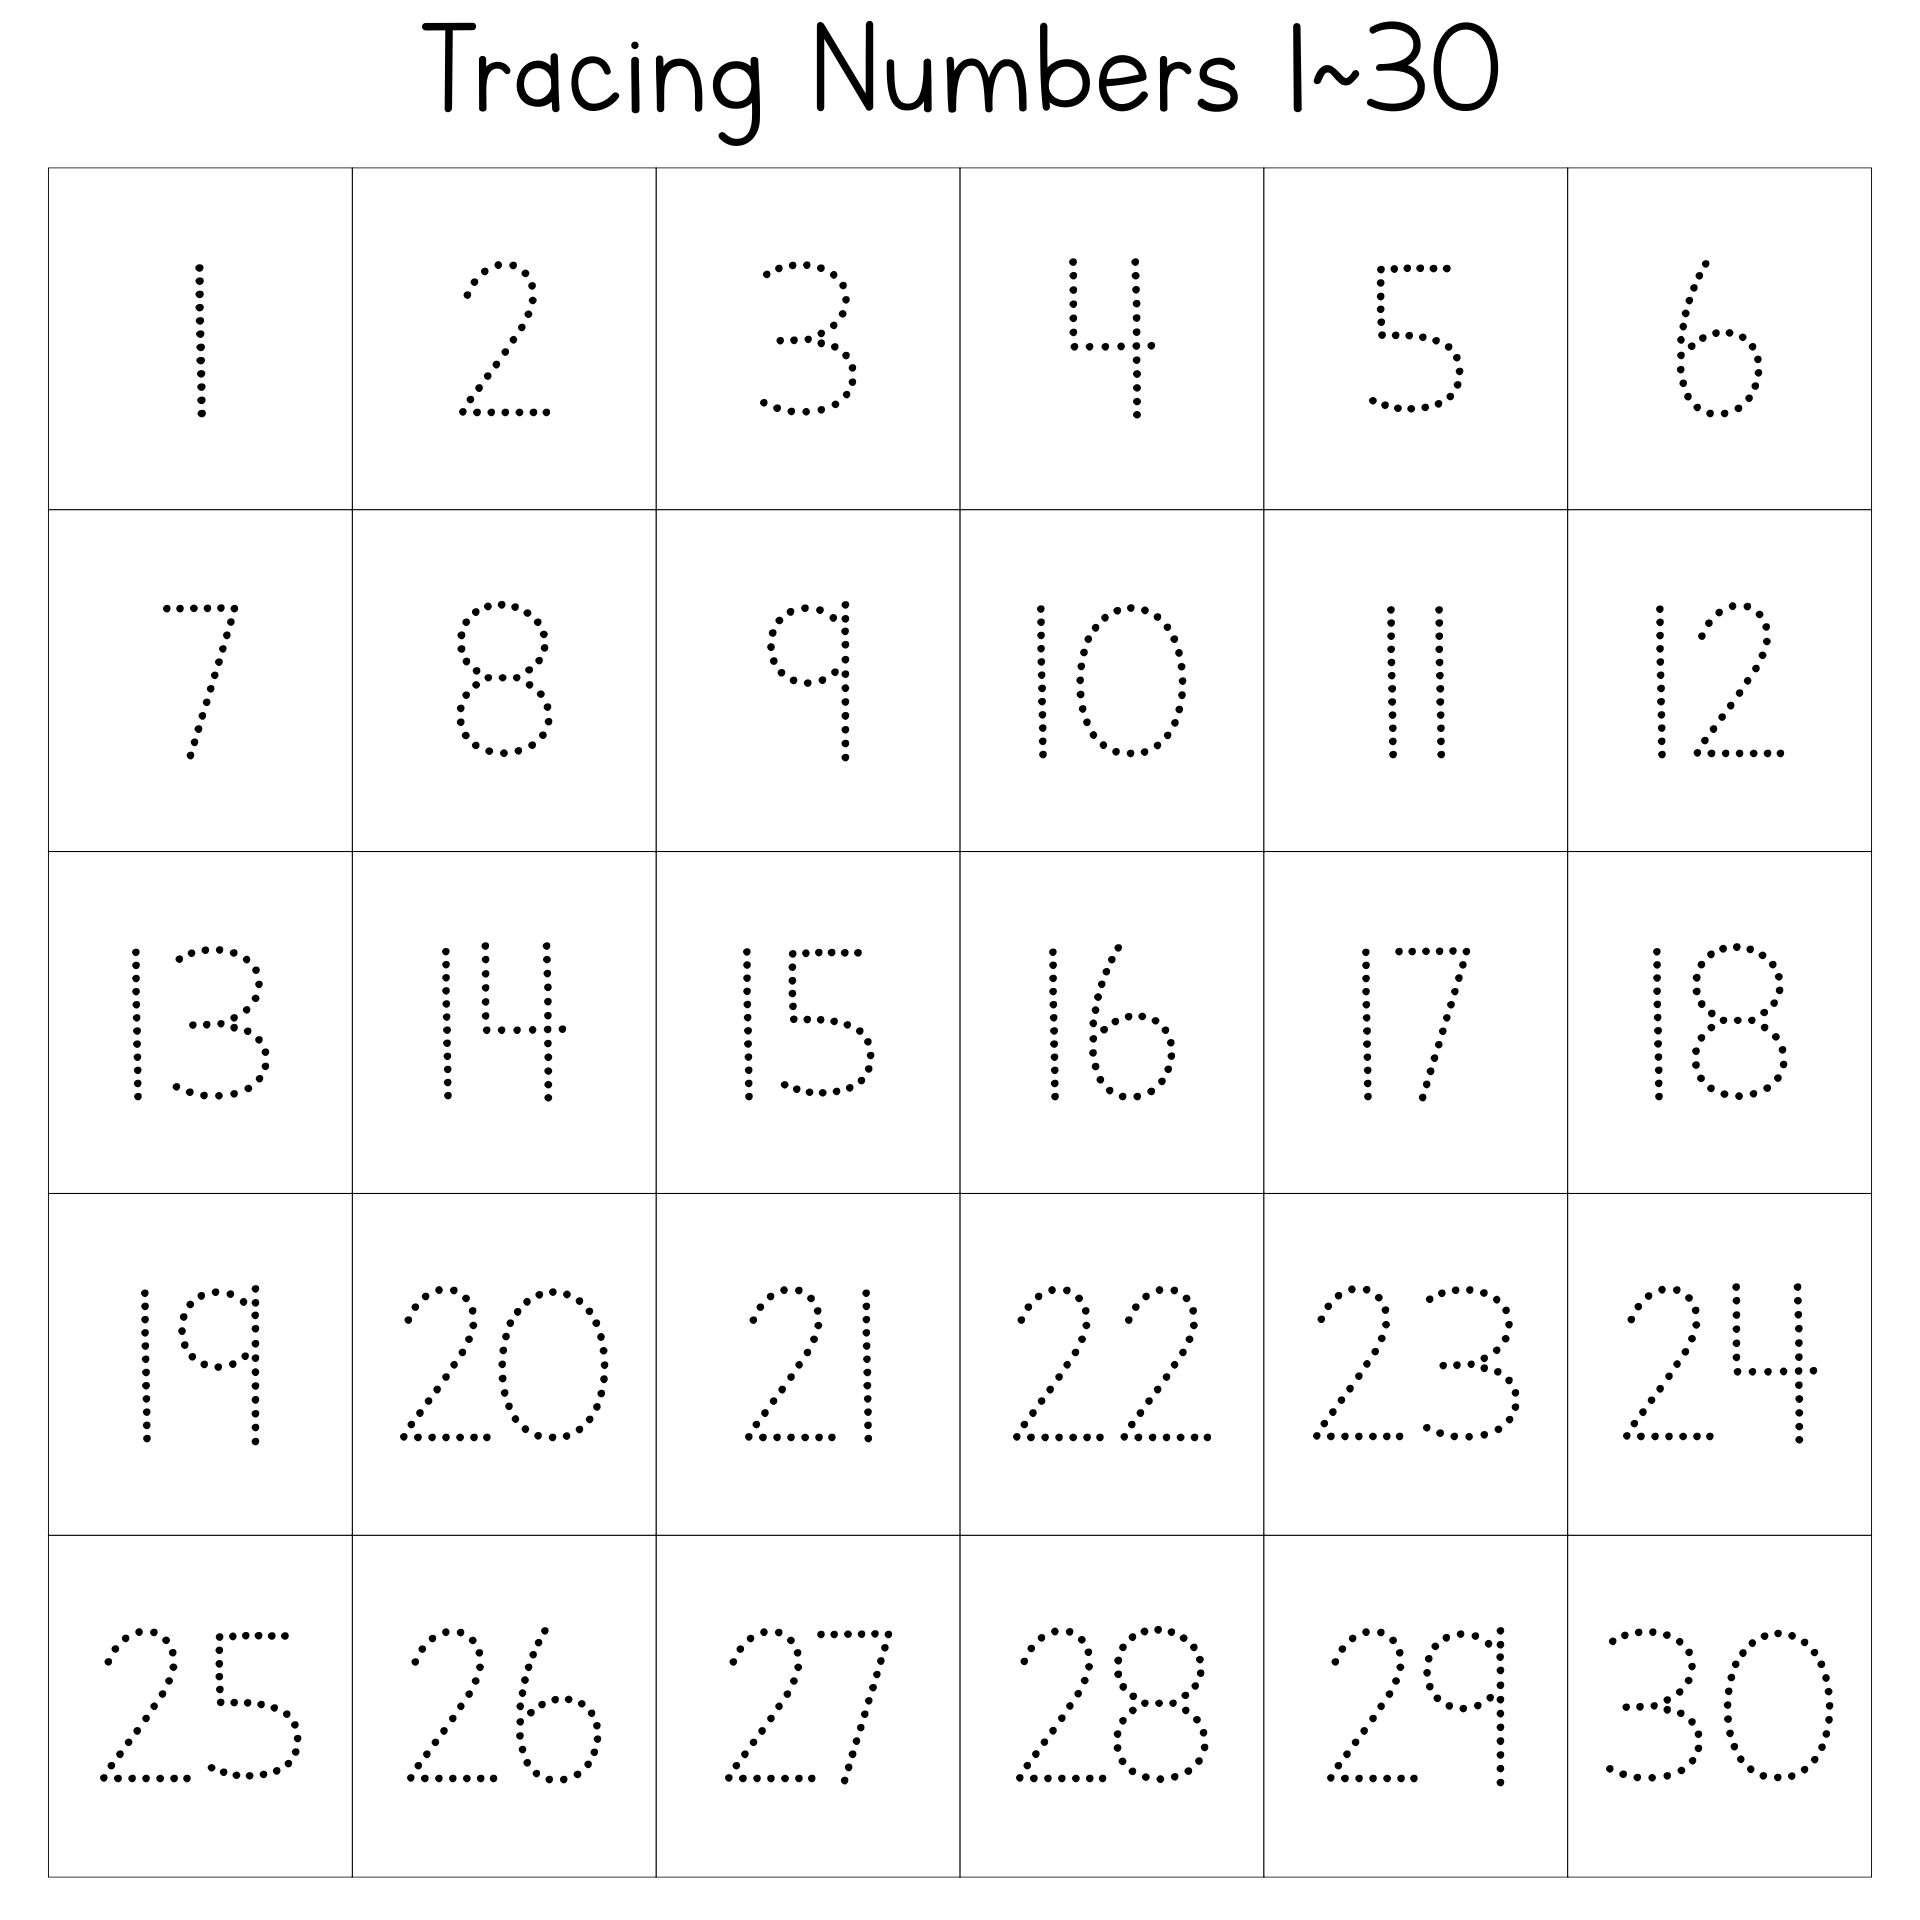 printable-number-chart-1-30-class-playground-printable-numbers-1-30